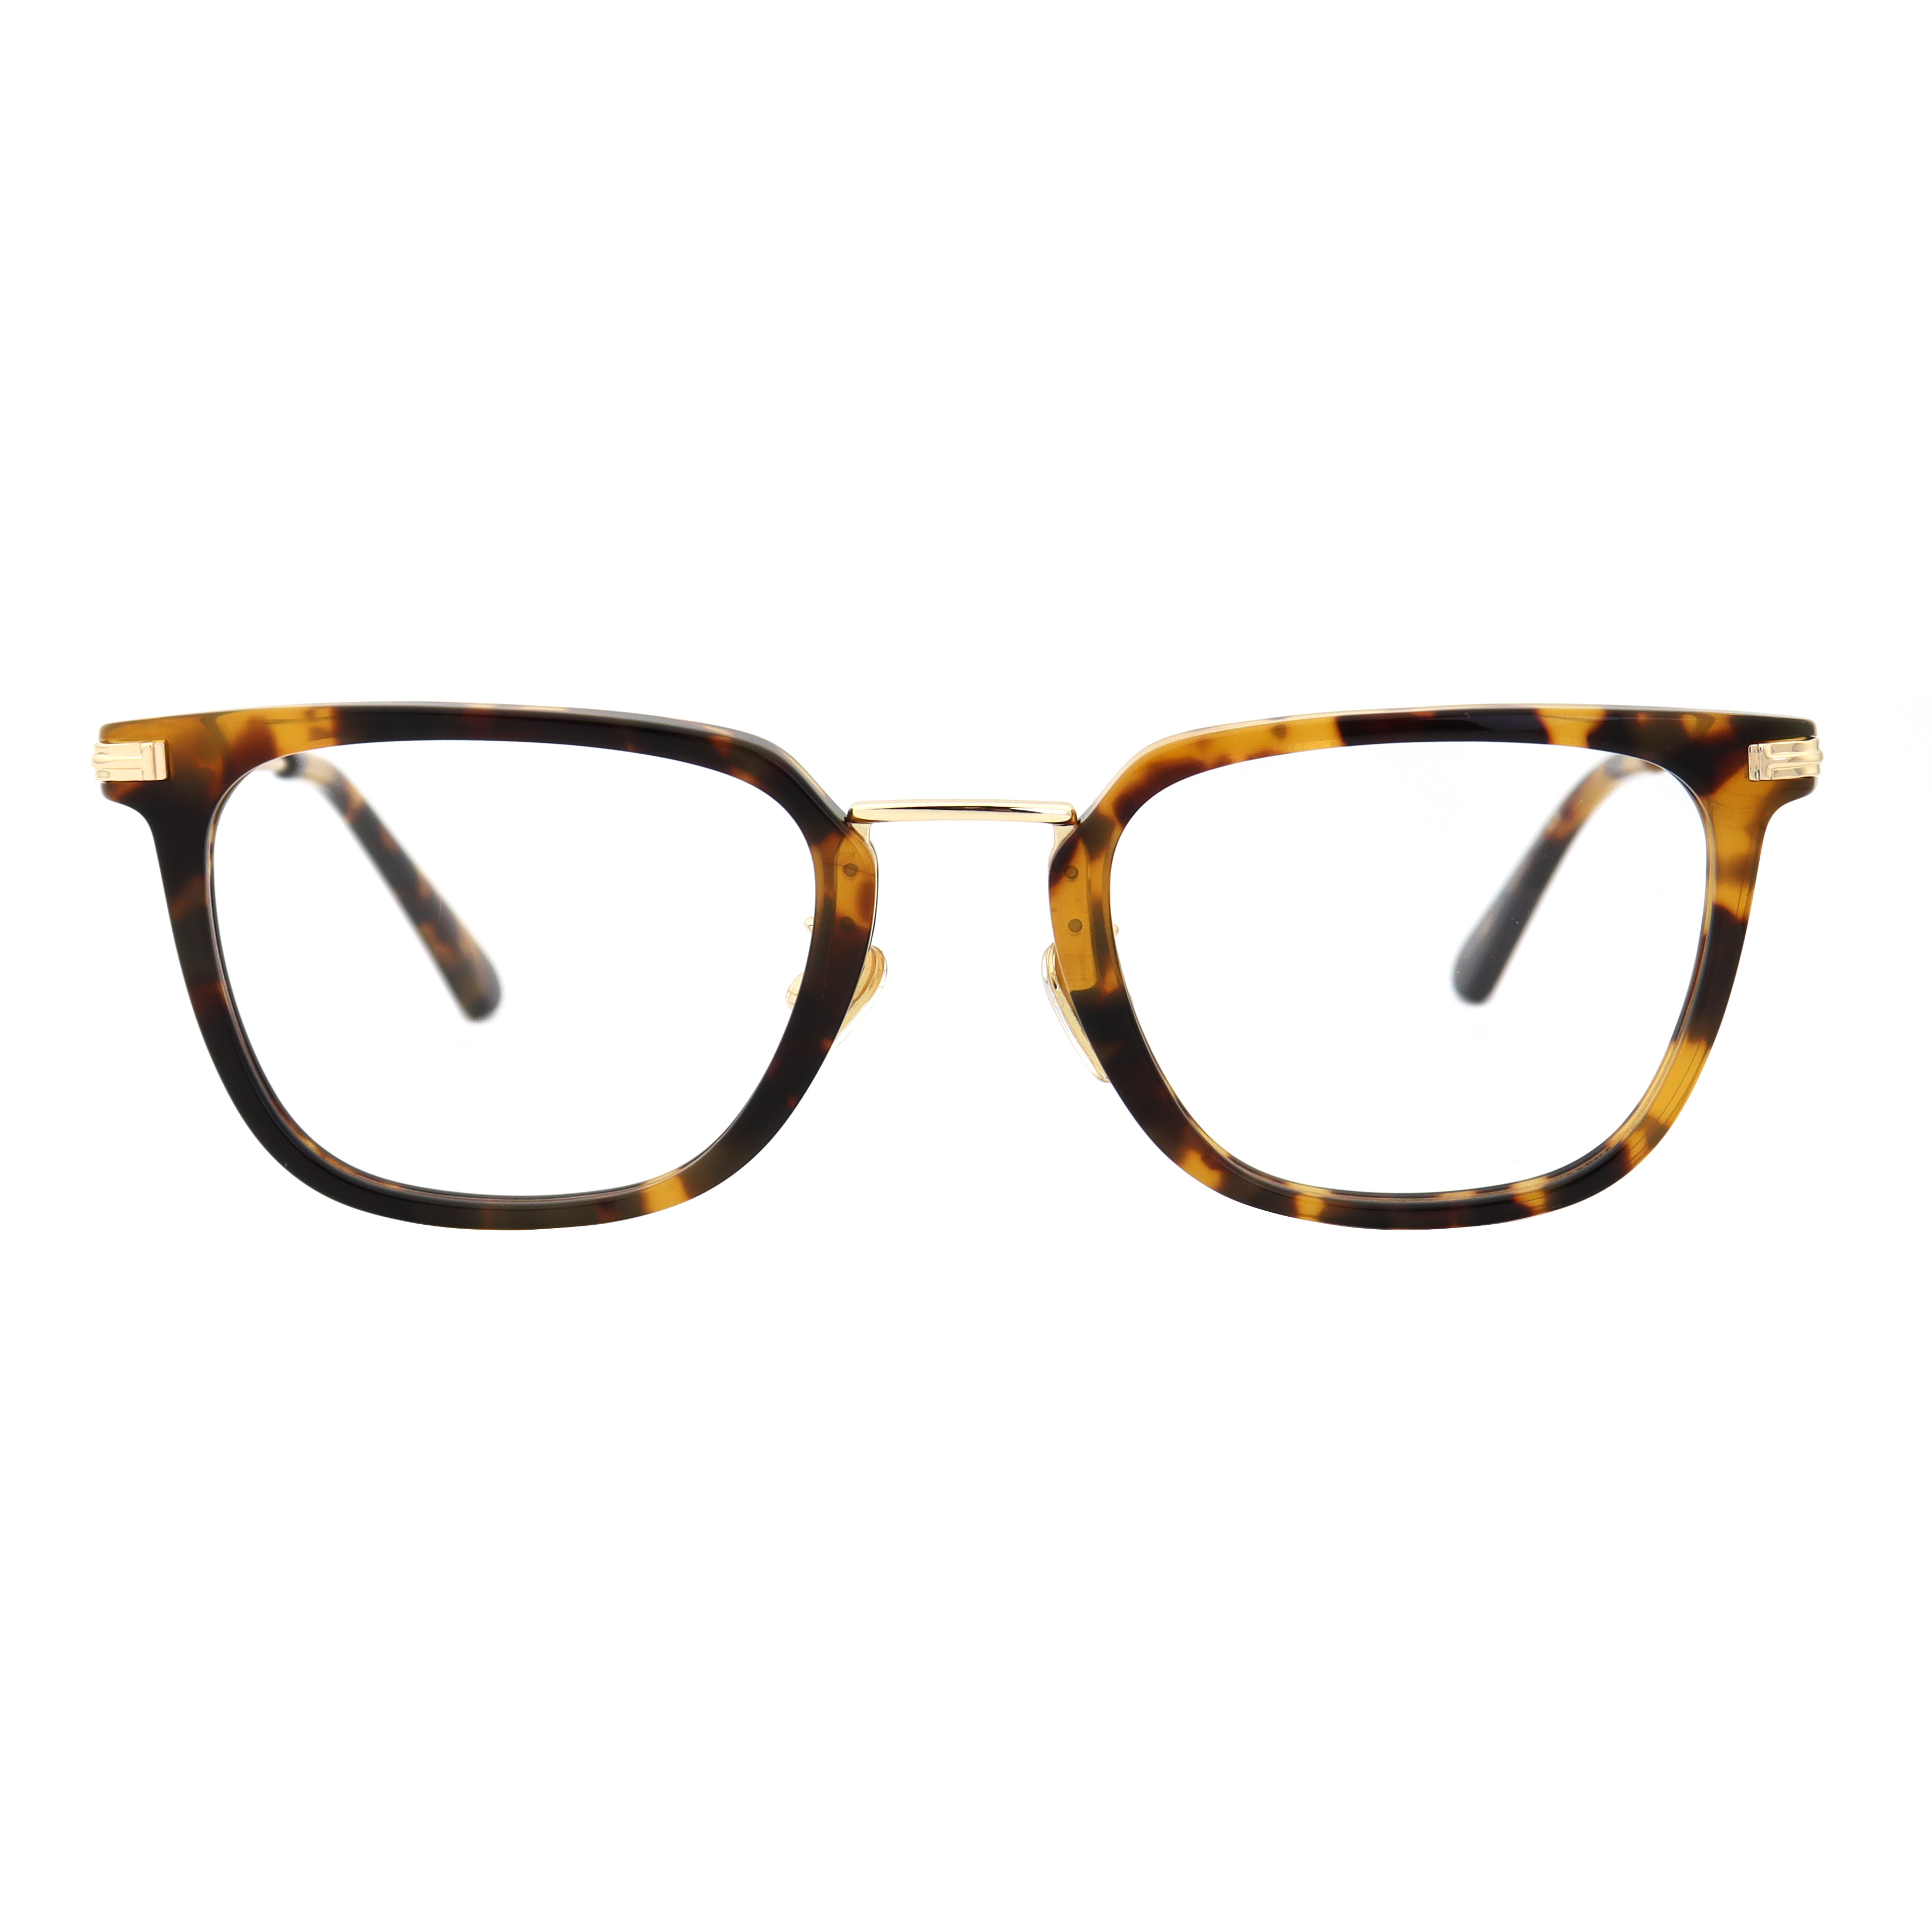 Mixedclassic and fashion eyewear in acetate and metal